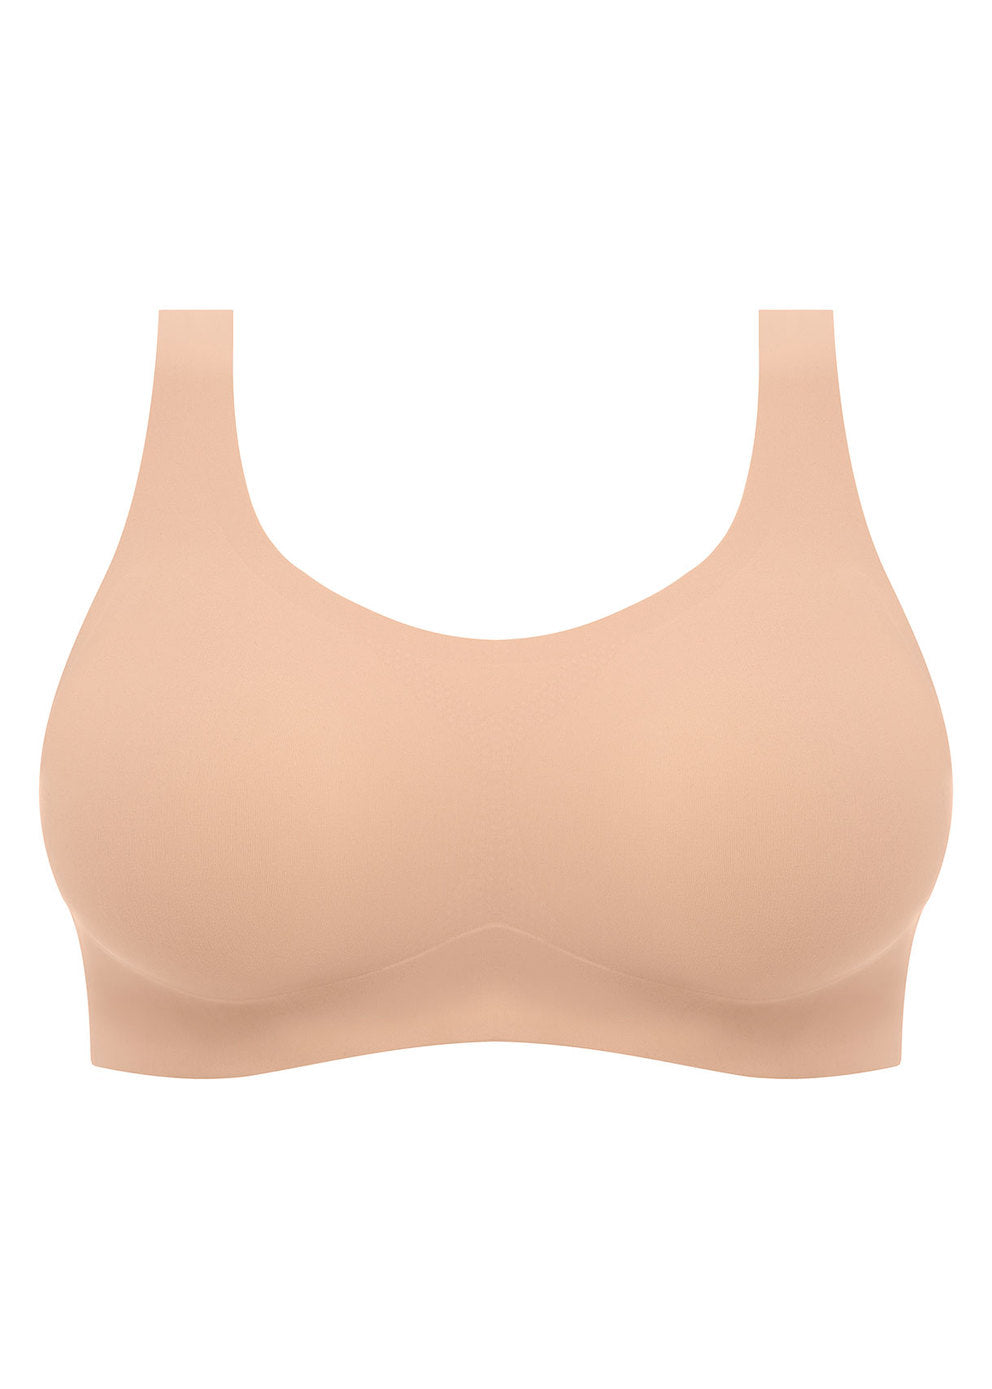 Smoothease Non-Wired Bralette - Natural Beige